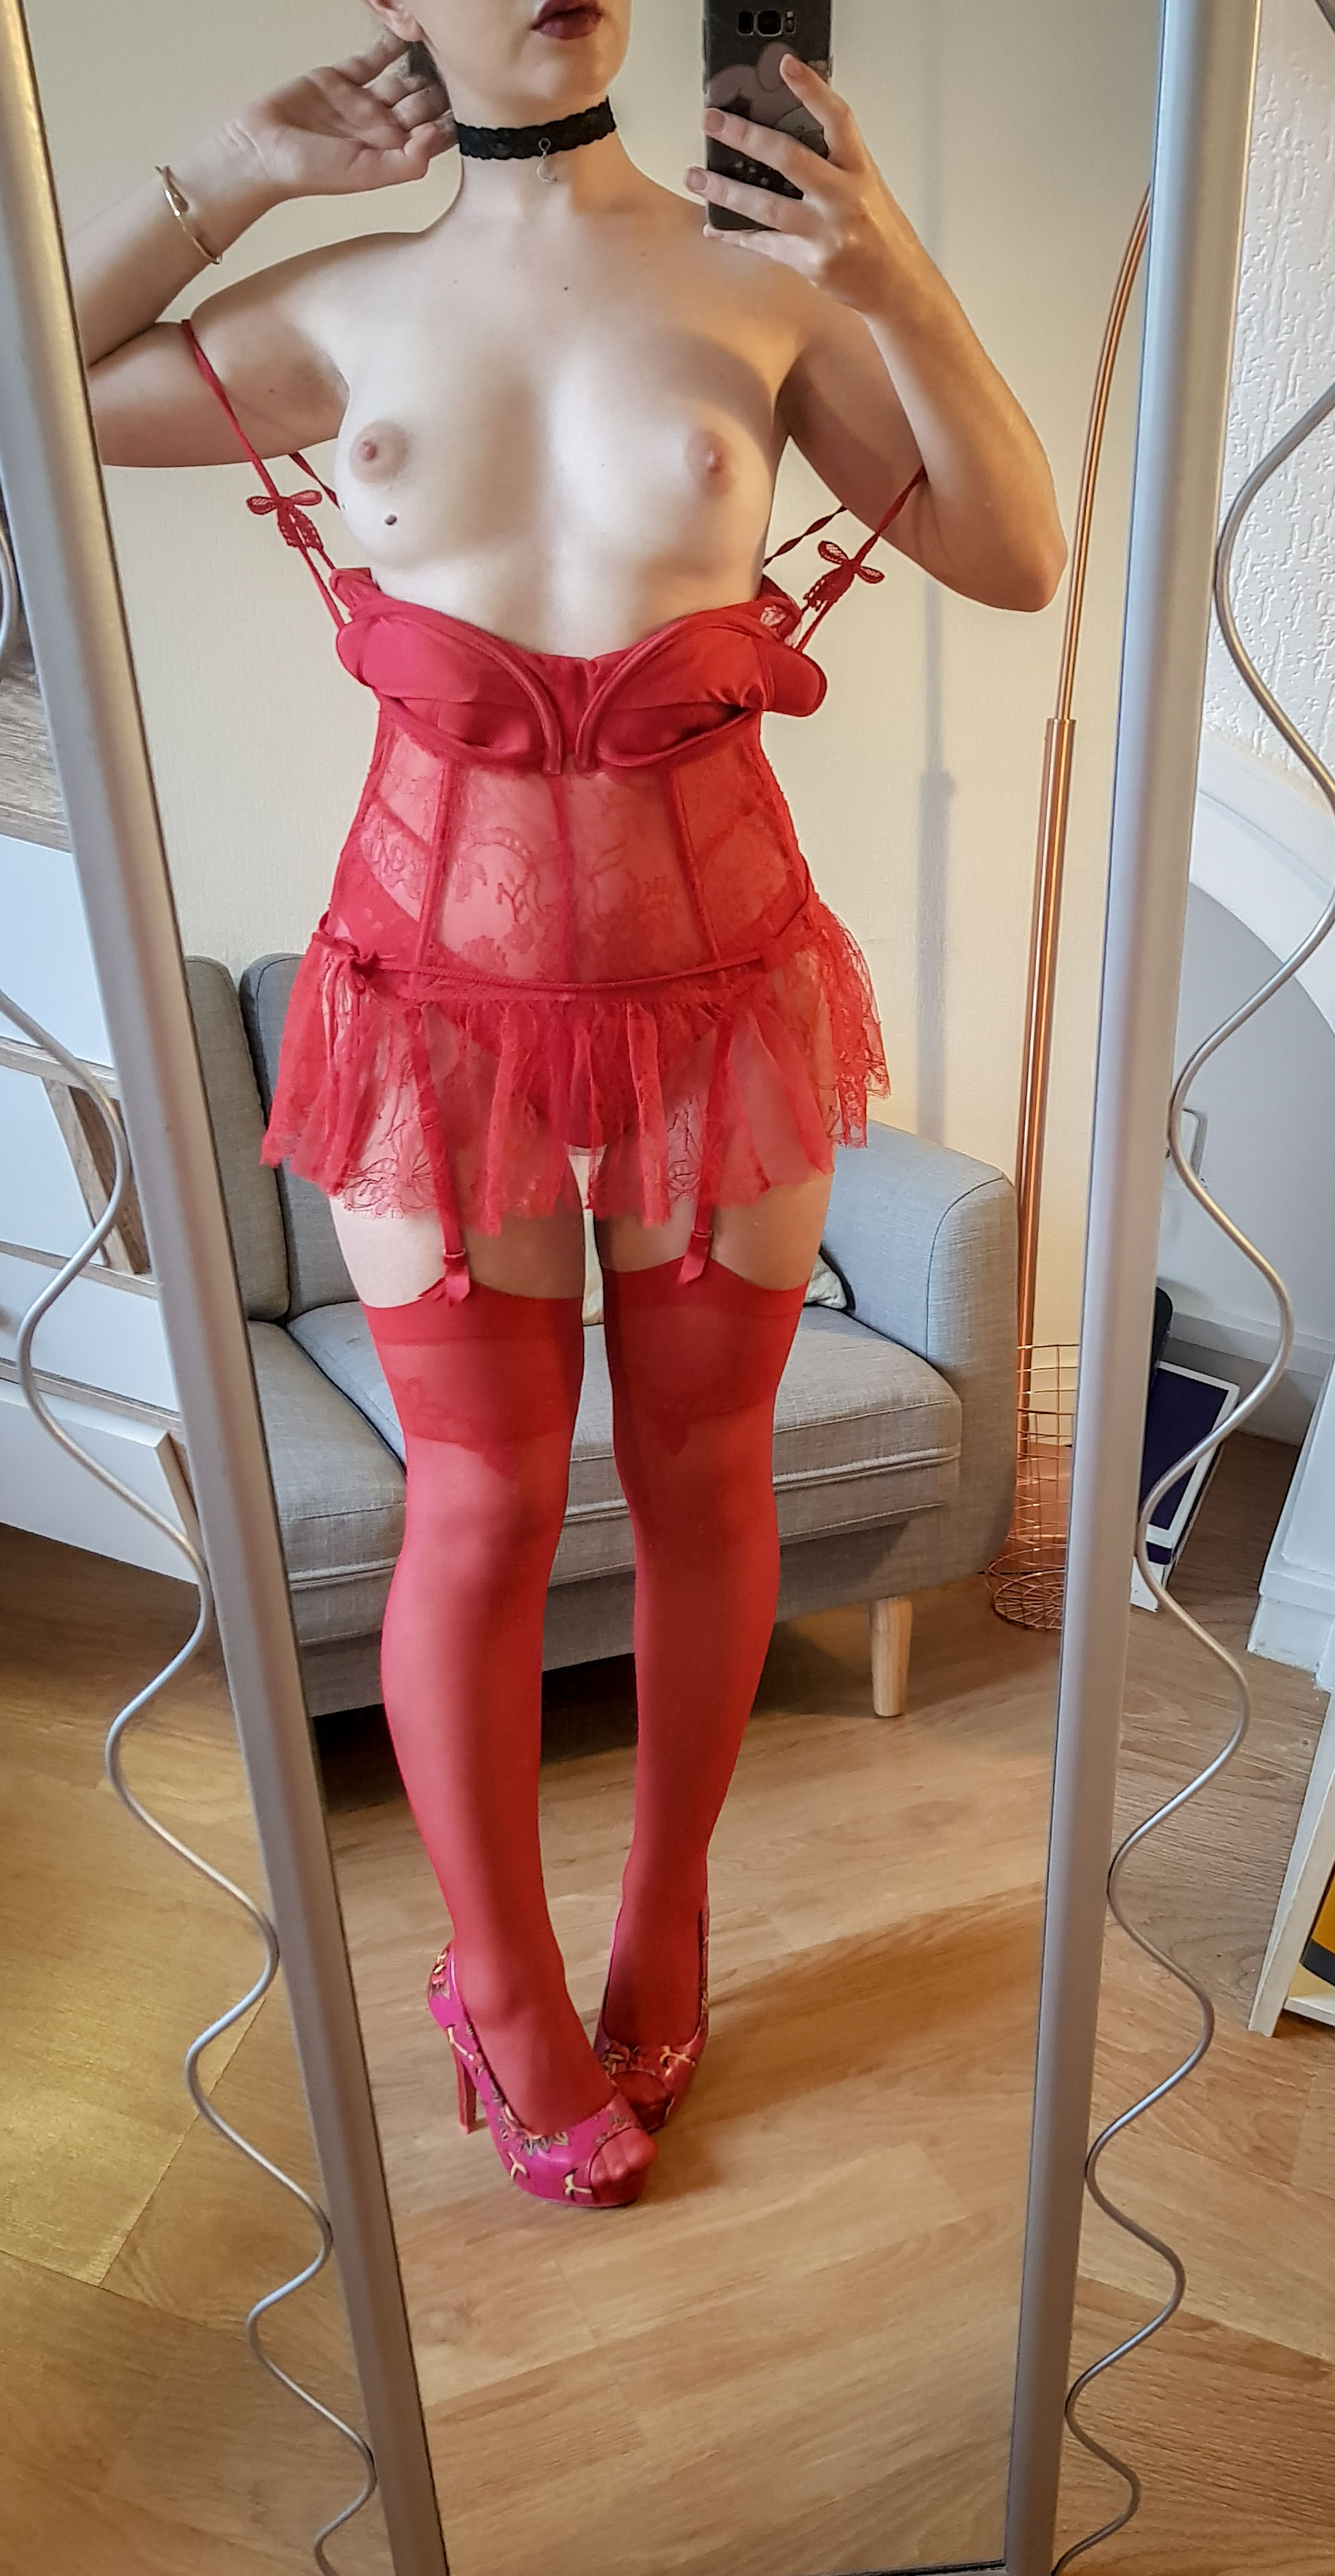 Good Petite Porn - Is petite + lingerie a good combo ? [5' tall] Porn Pic - EPORNER